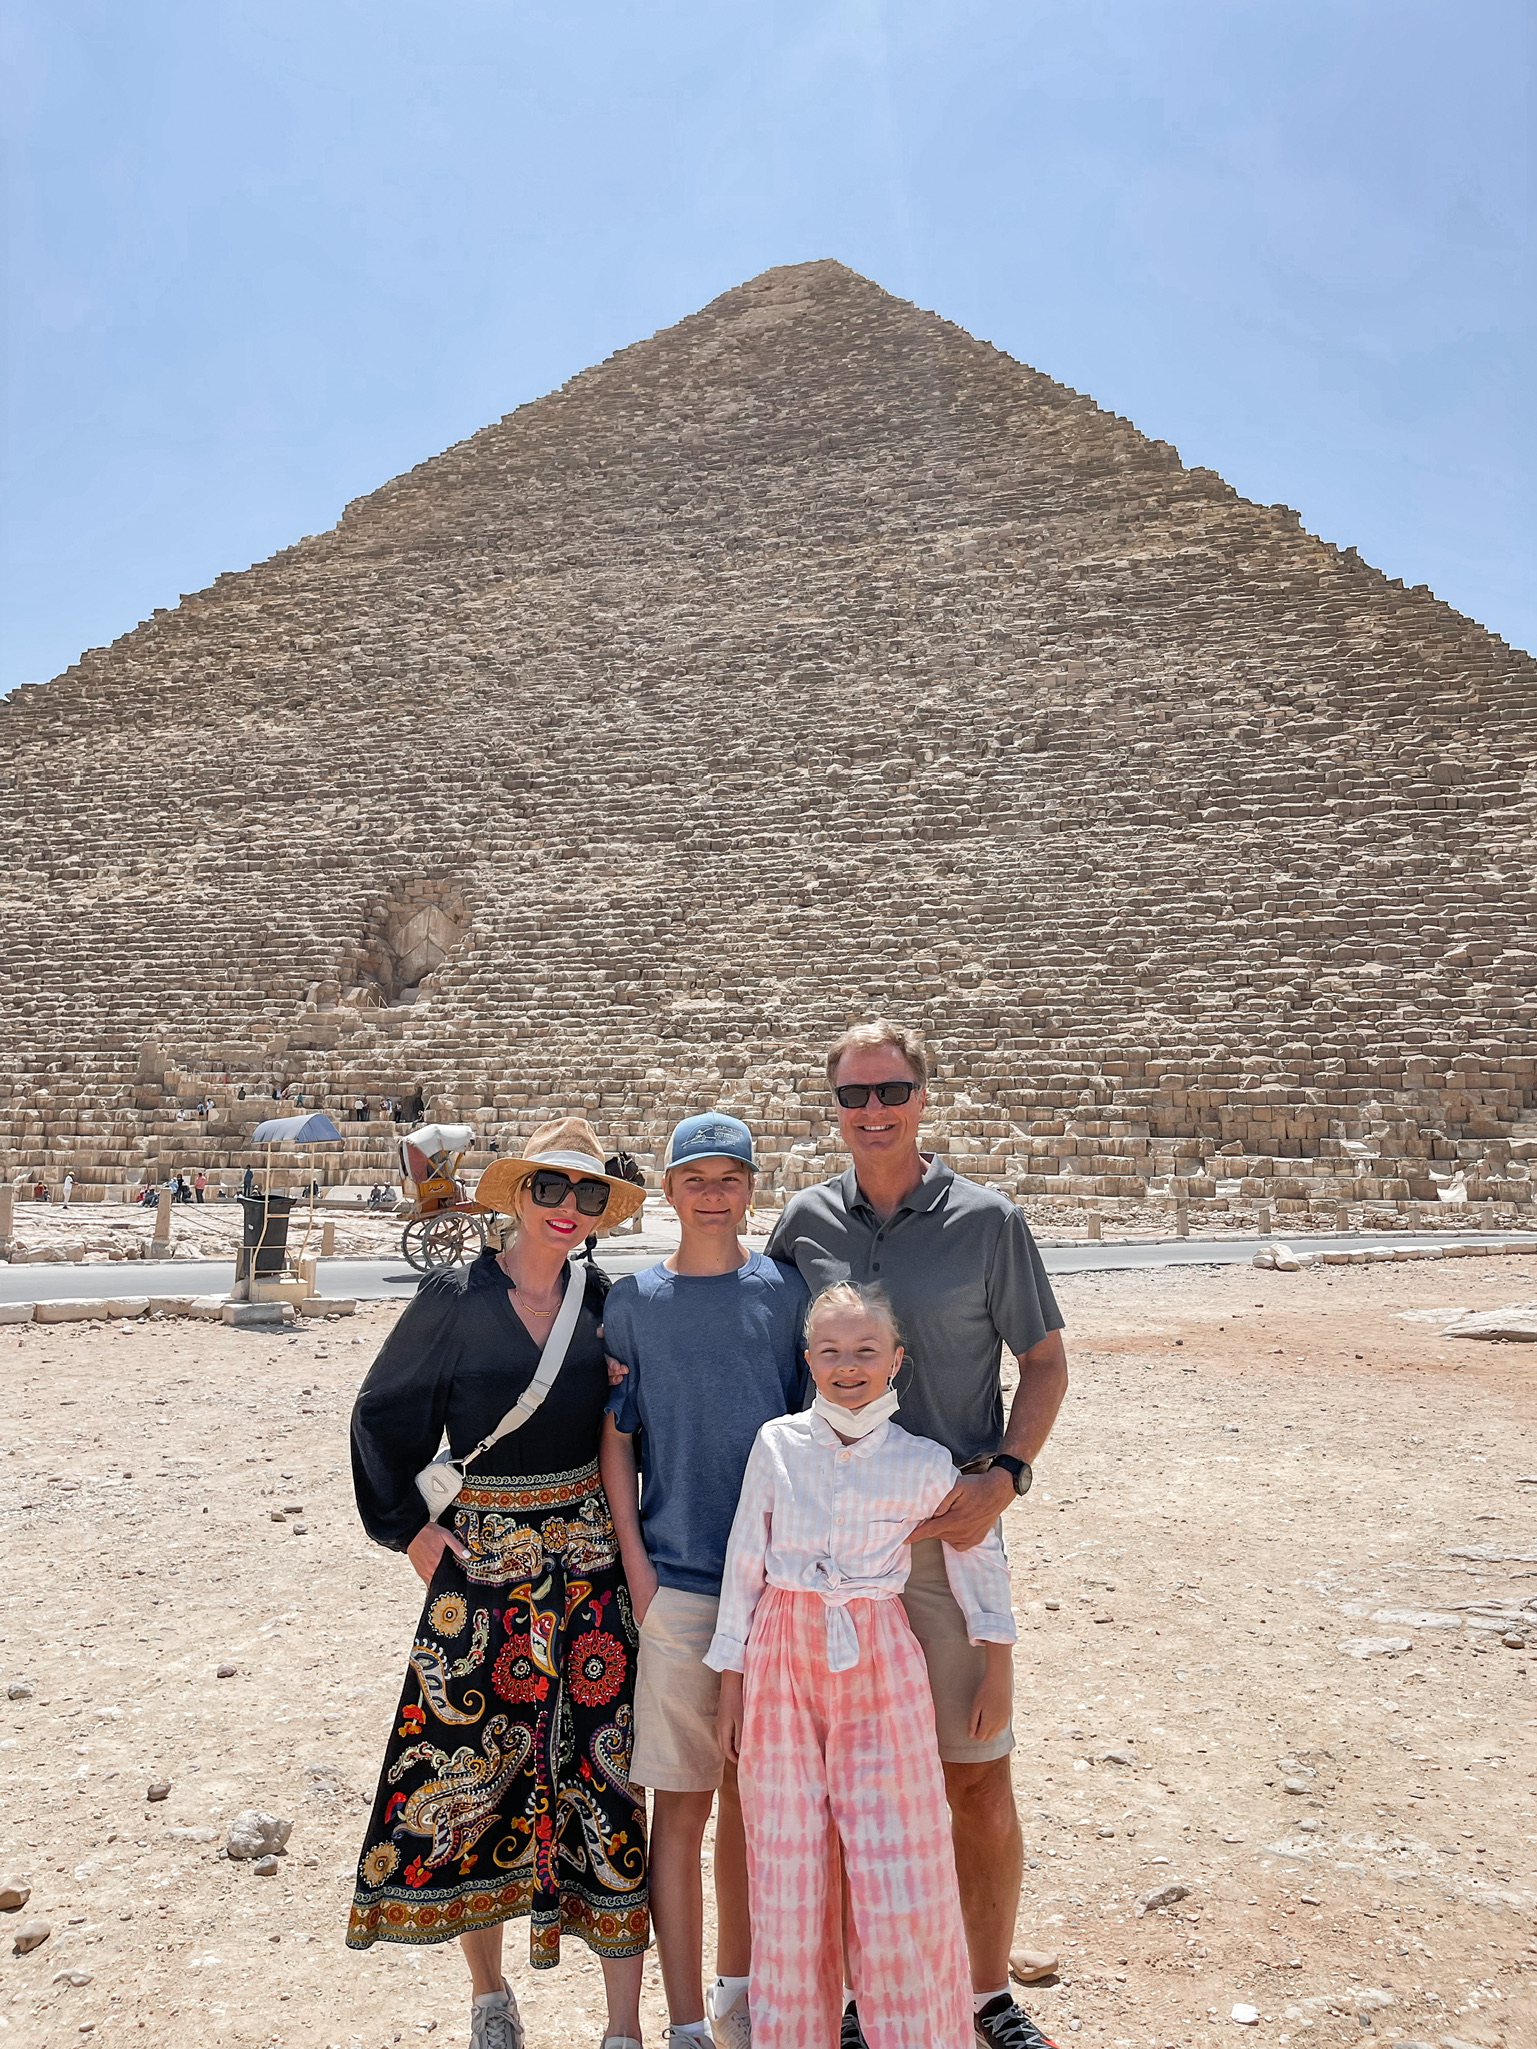 planning a trip to the middle east, where to go in the middle east, how to plan a trip to the middle east, The Great Pyramids of Giza, Egypt, Cairo Egypt, erin busbee, busbee style, busbee family travels, cairo trip, great pyramids of giza trip, father's day gift ideas, fashion blogger over 40 Erin Busbee husband and children in egypt, unique father's day gift ideas, unique father's day gifts, best father's day gifts